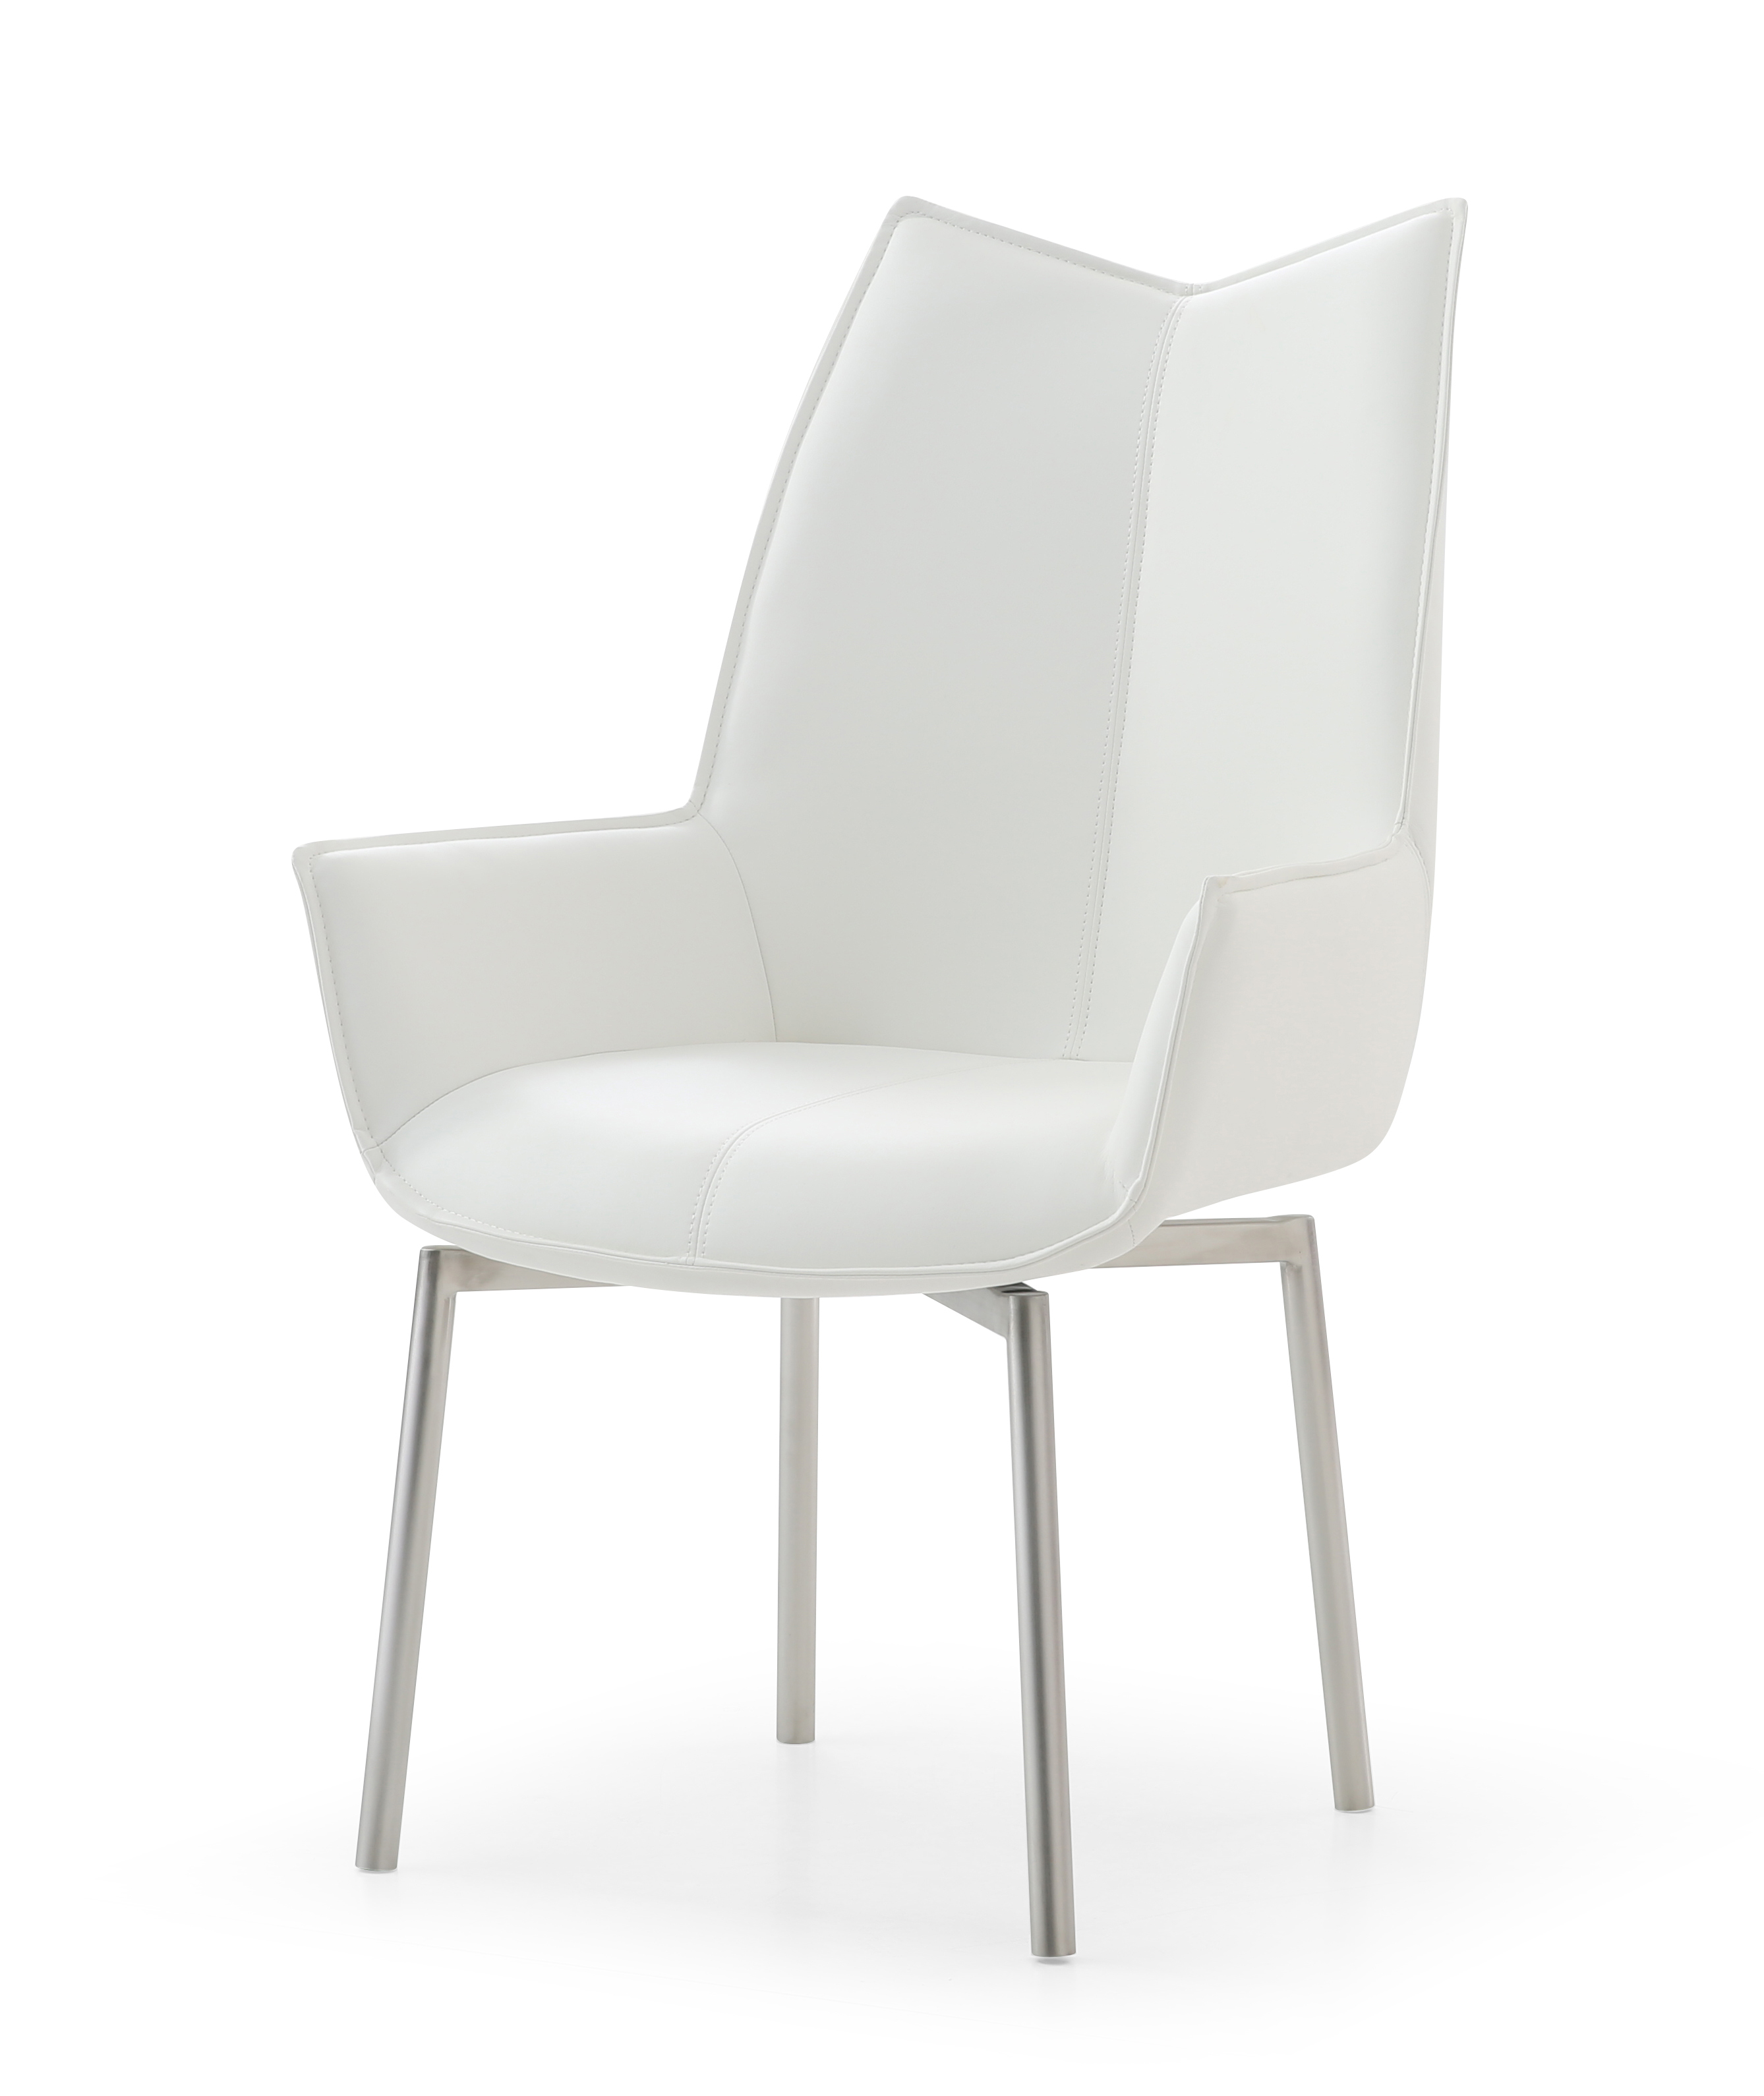 Clearance Dining Room 1218 swivel dining chair White